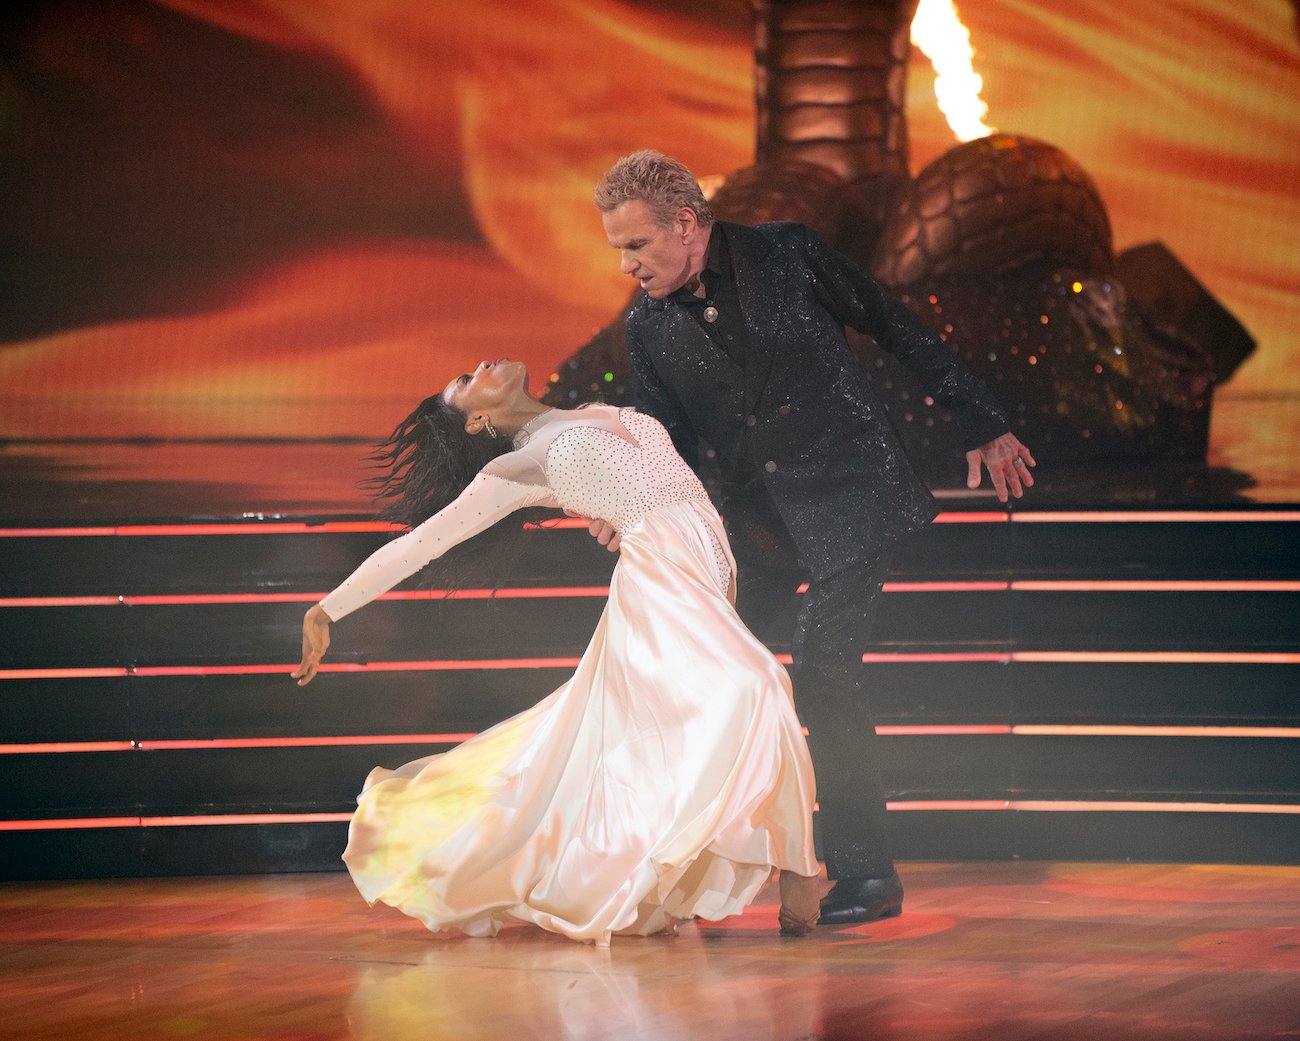 Britt Stewart and Martin Kove perform during the 'Dancing with the Stars' season 30 premiere